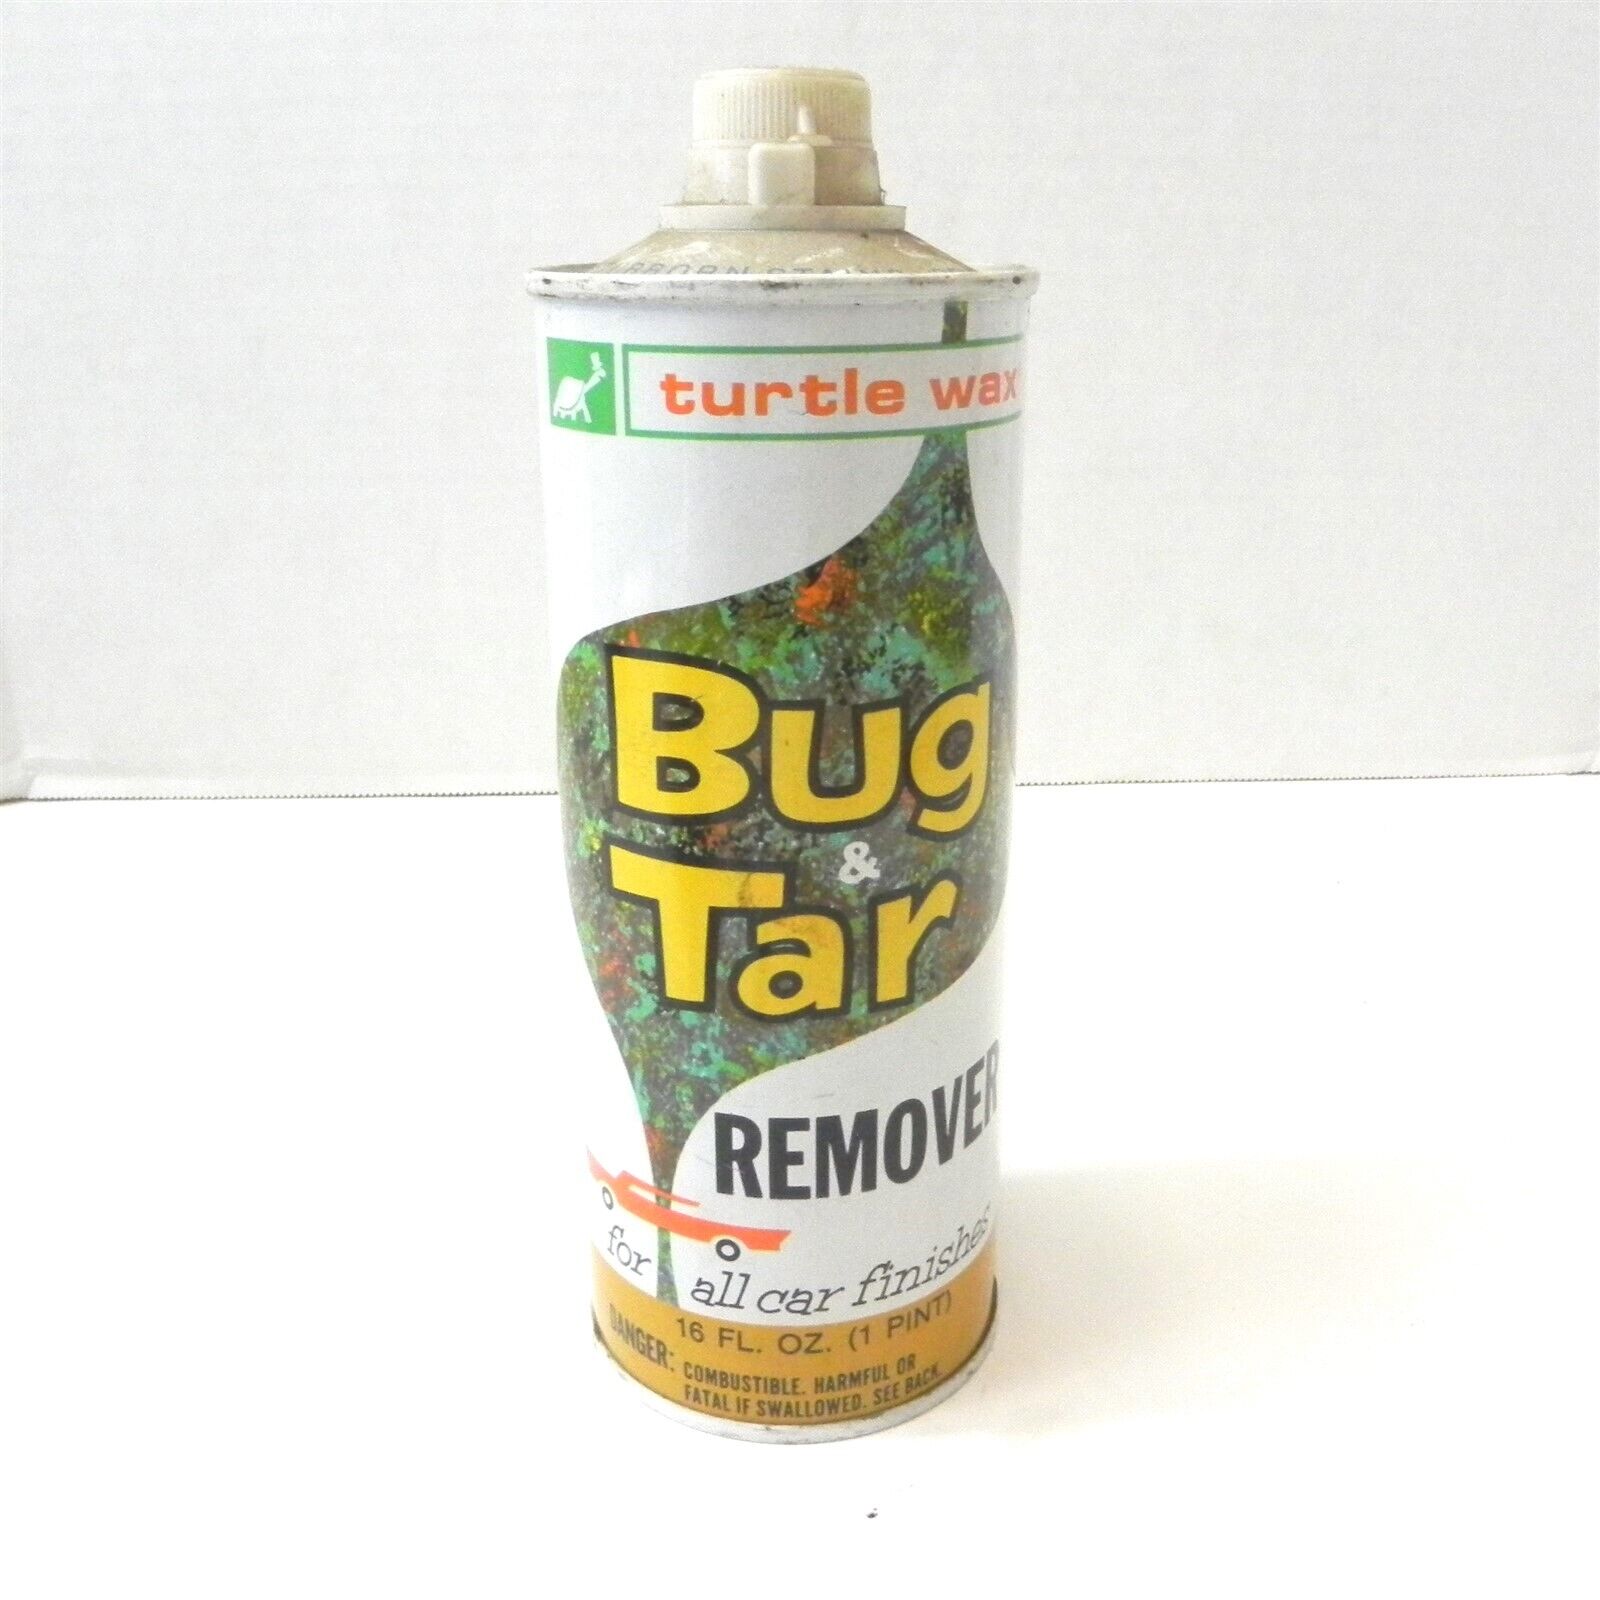 VINTAGE TURTLE WAX BUG & TAR REMOVER 16 FL OZ CAN APPROX HALF FULL USED 